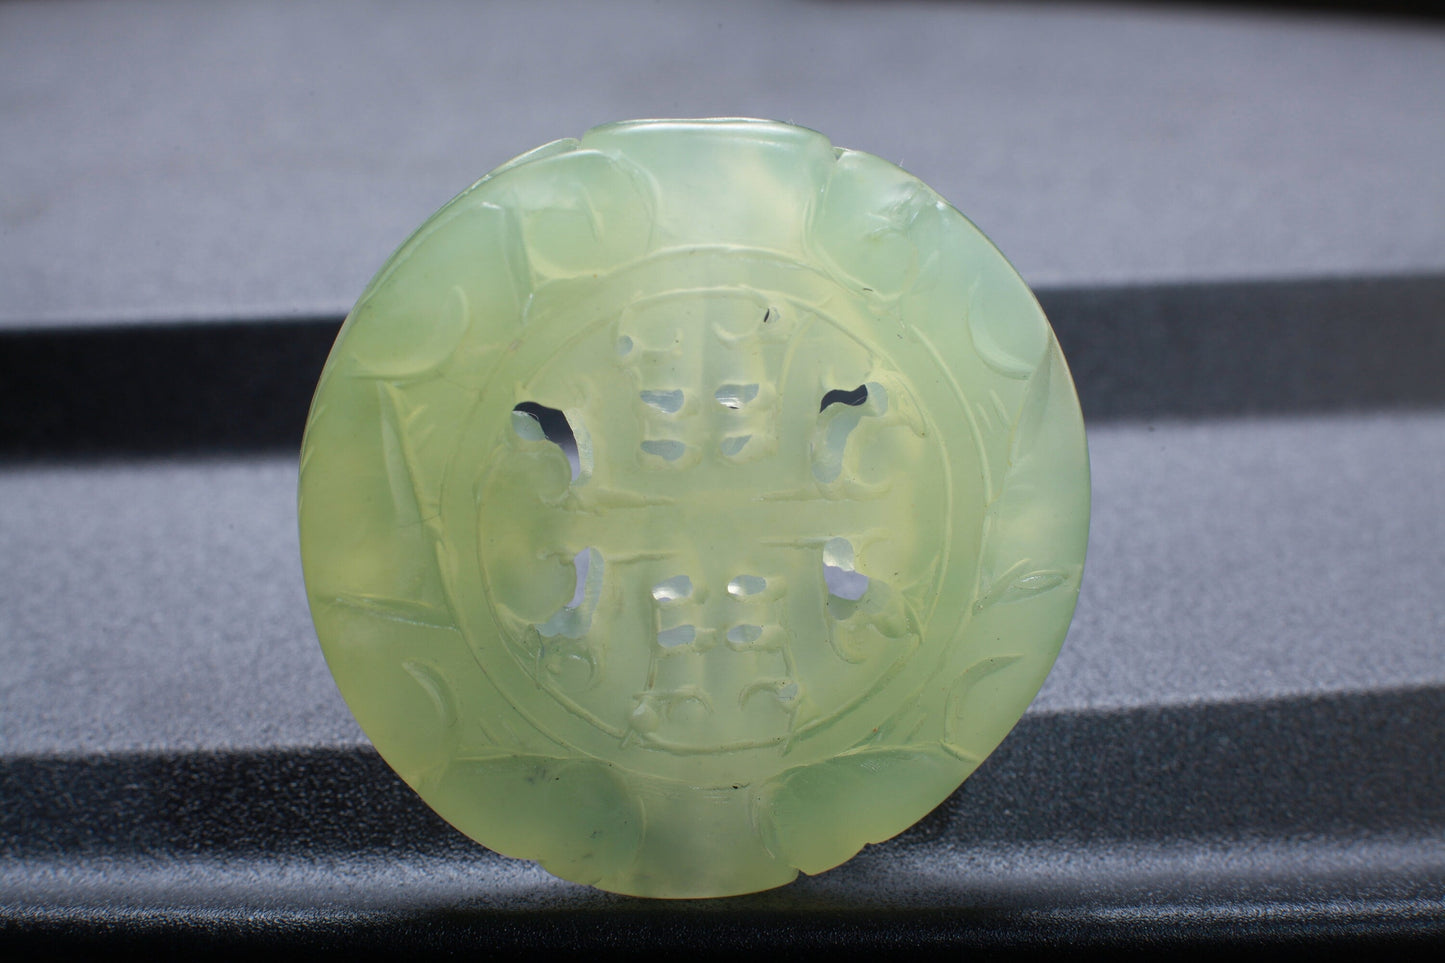 Genuine Nephrite Jade Double Sided Carved Long Life Pendant, Handcrafted Disc, 4mm Big Hole, Large Hollow Filigree Carved Jade Charm Pendant